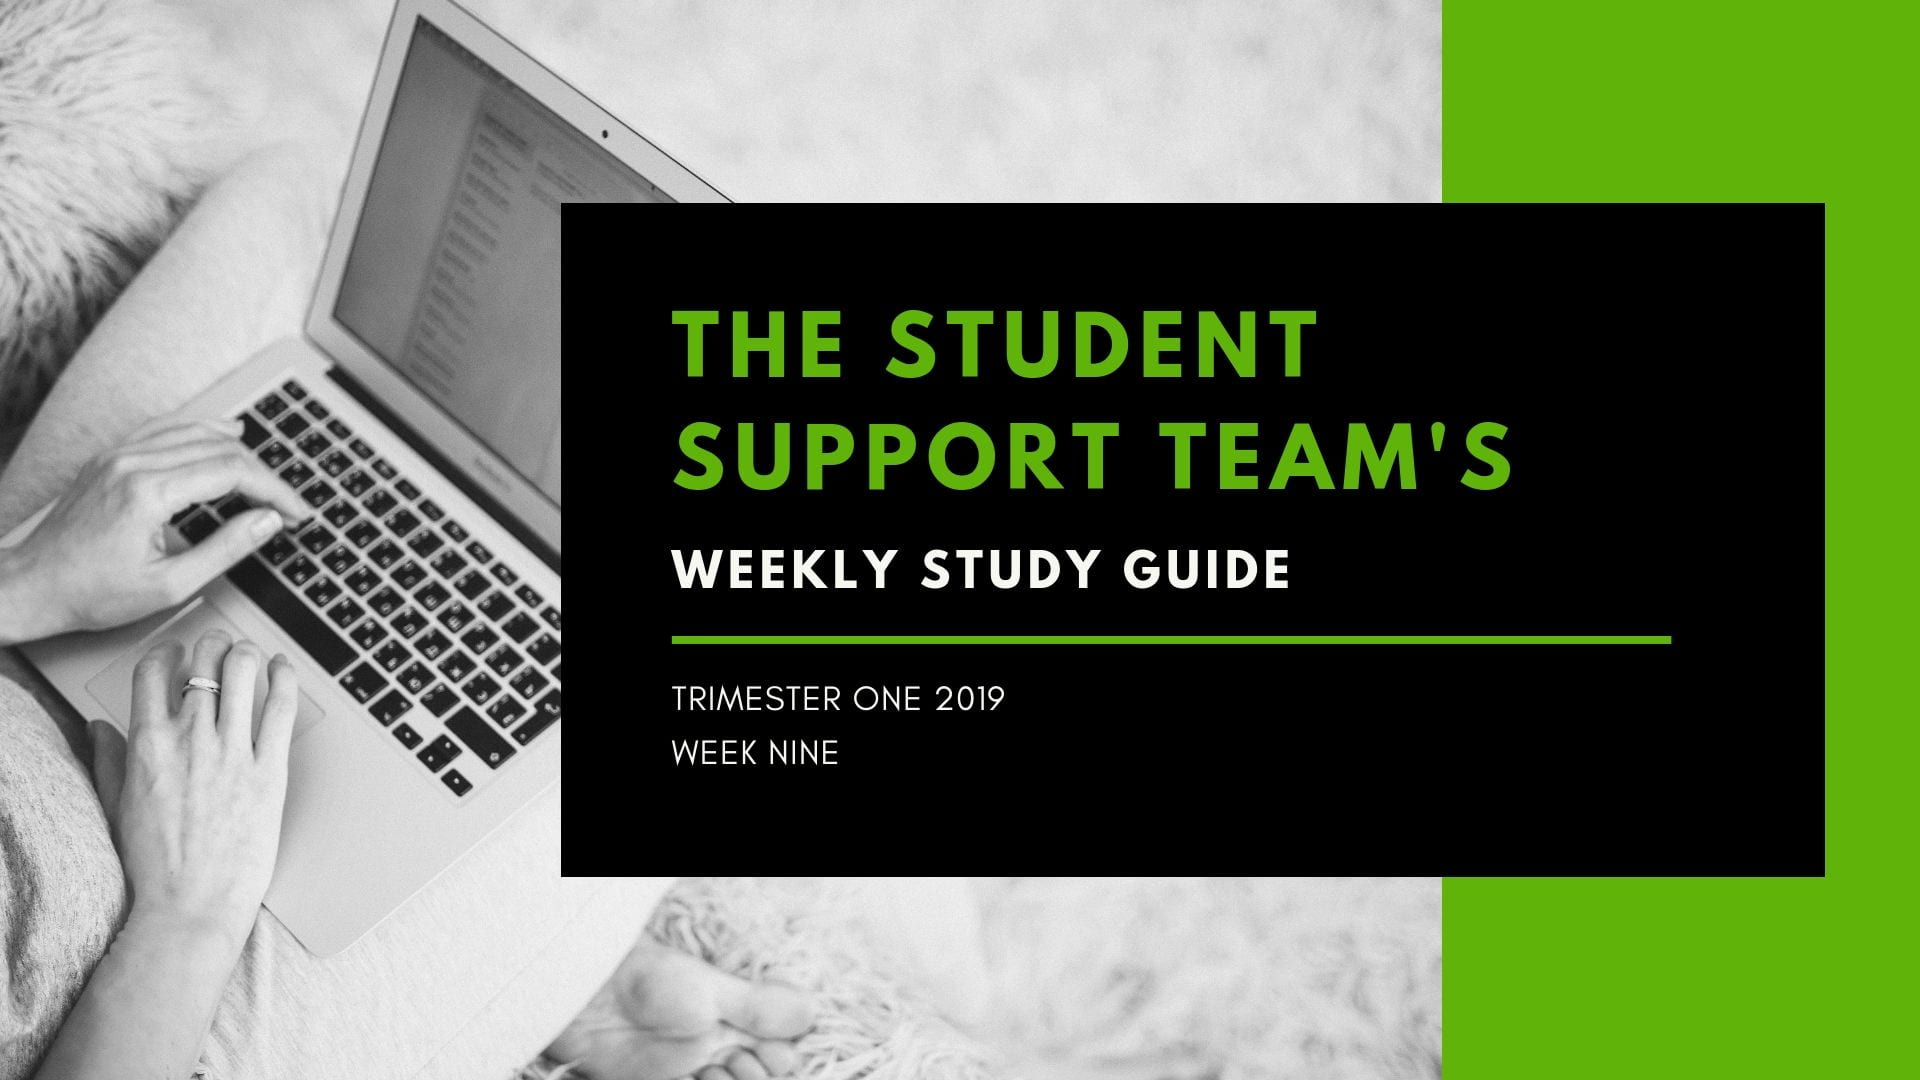 The Student Support Team’s Weekly Study Guide: Week Nine; Get Study Tips and Tricks